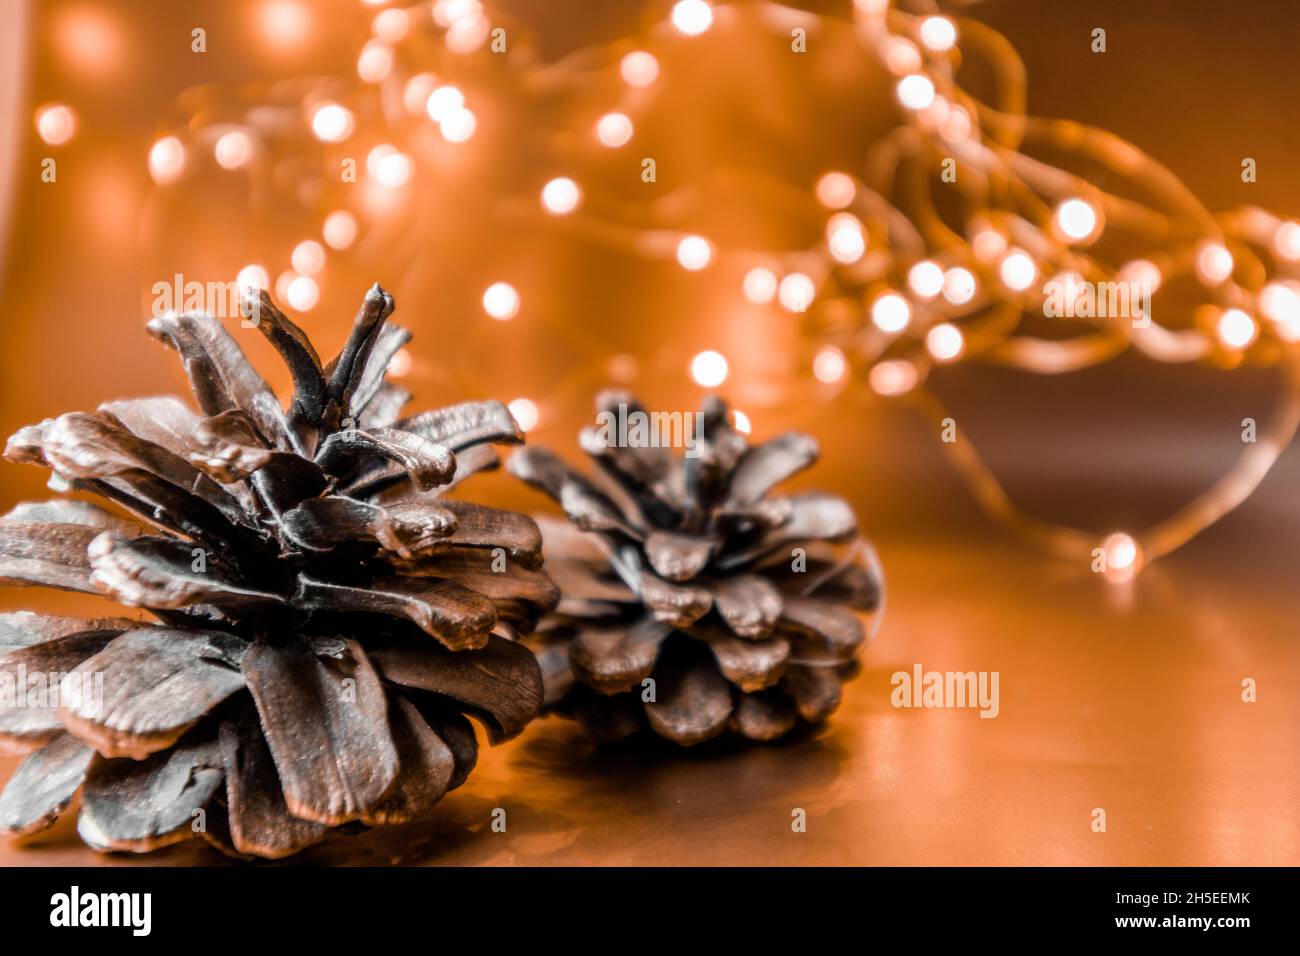 Christmas cones on a golden background with lights. Christmas background. Stock Photo